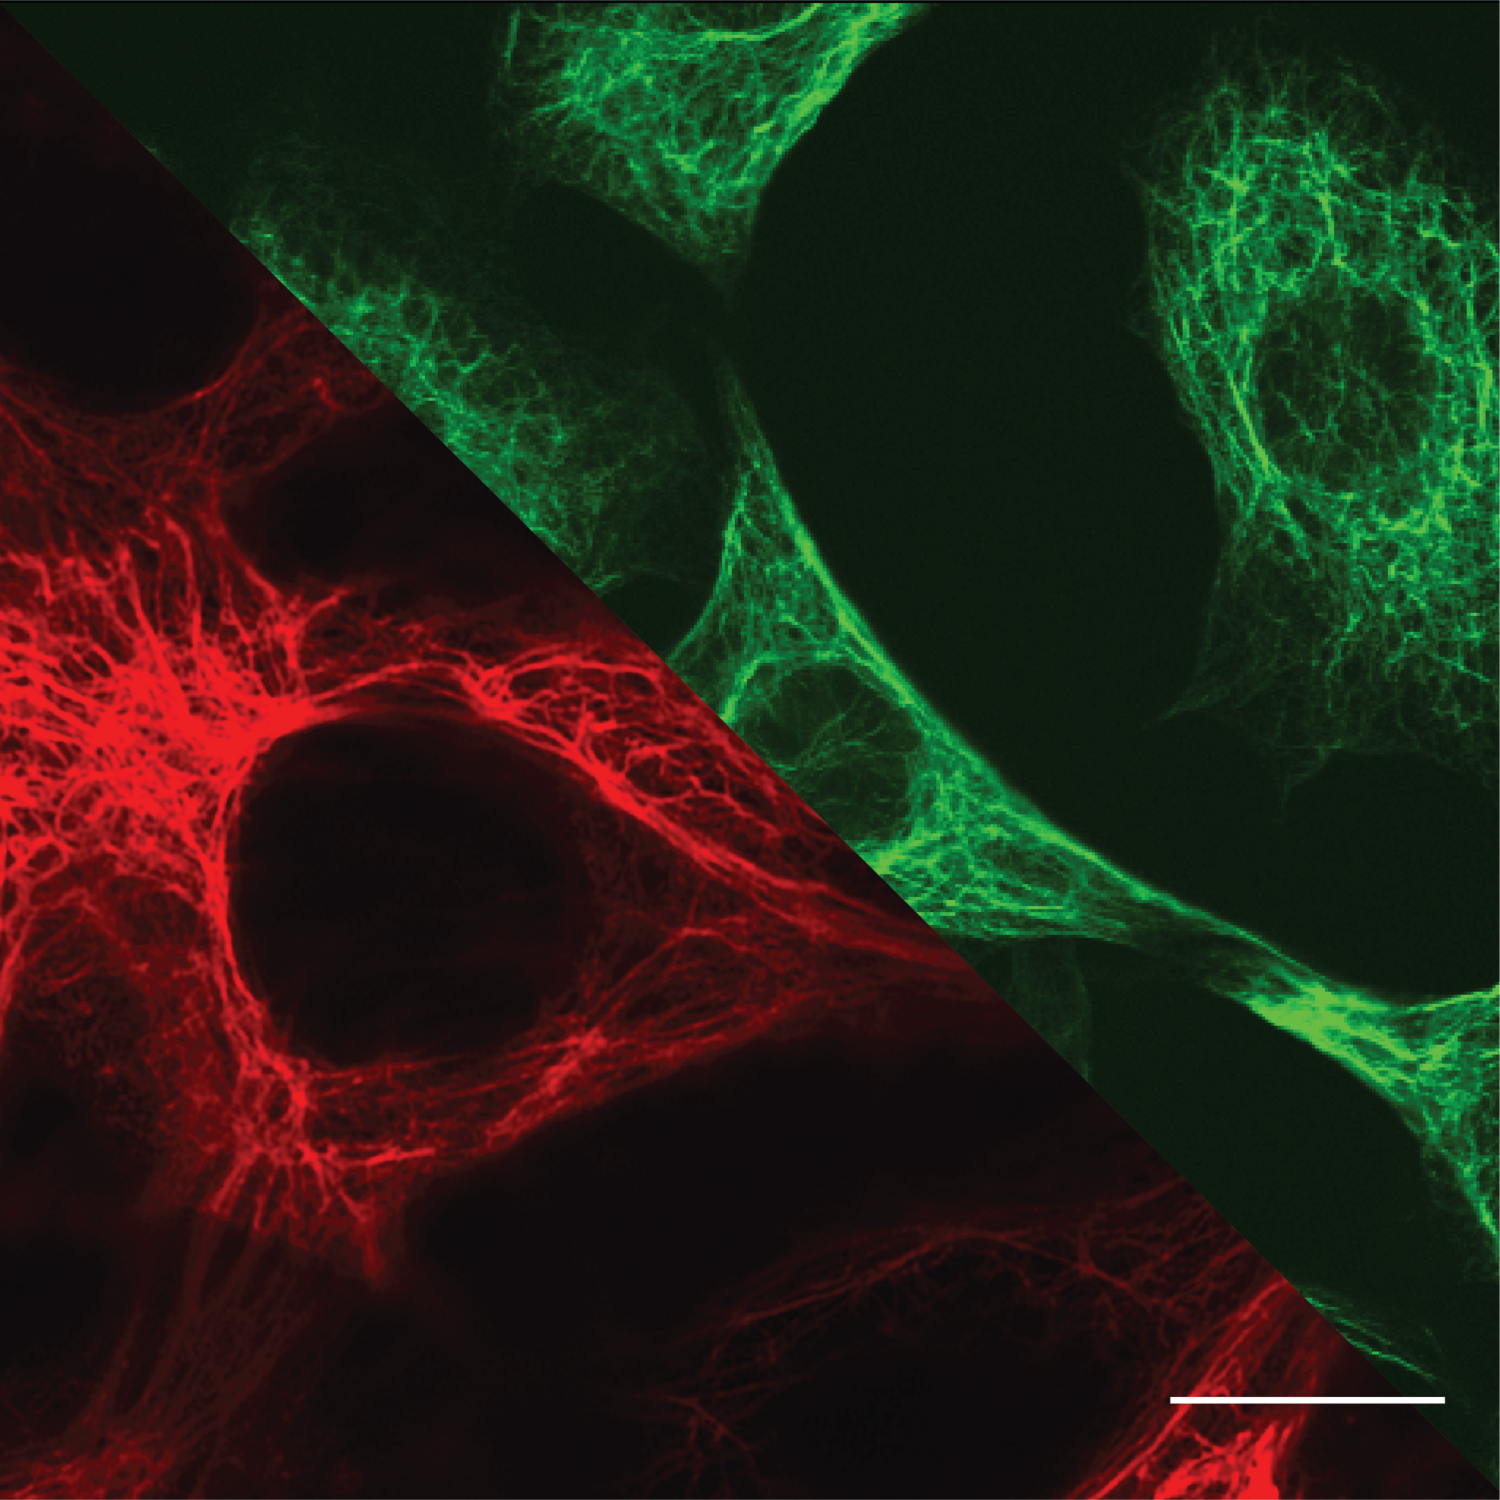 Microscopy images of biological cells: top right (green) - Vimentin intermediate filaments in fibroblasts; bottom left (red) - Keratin intermediate filaments in epithelial cells. Scale: 10 µm.